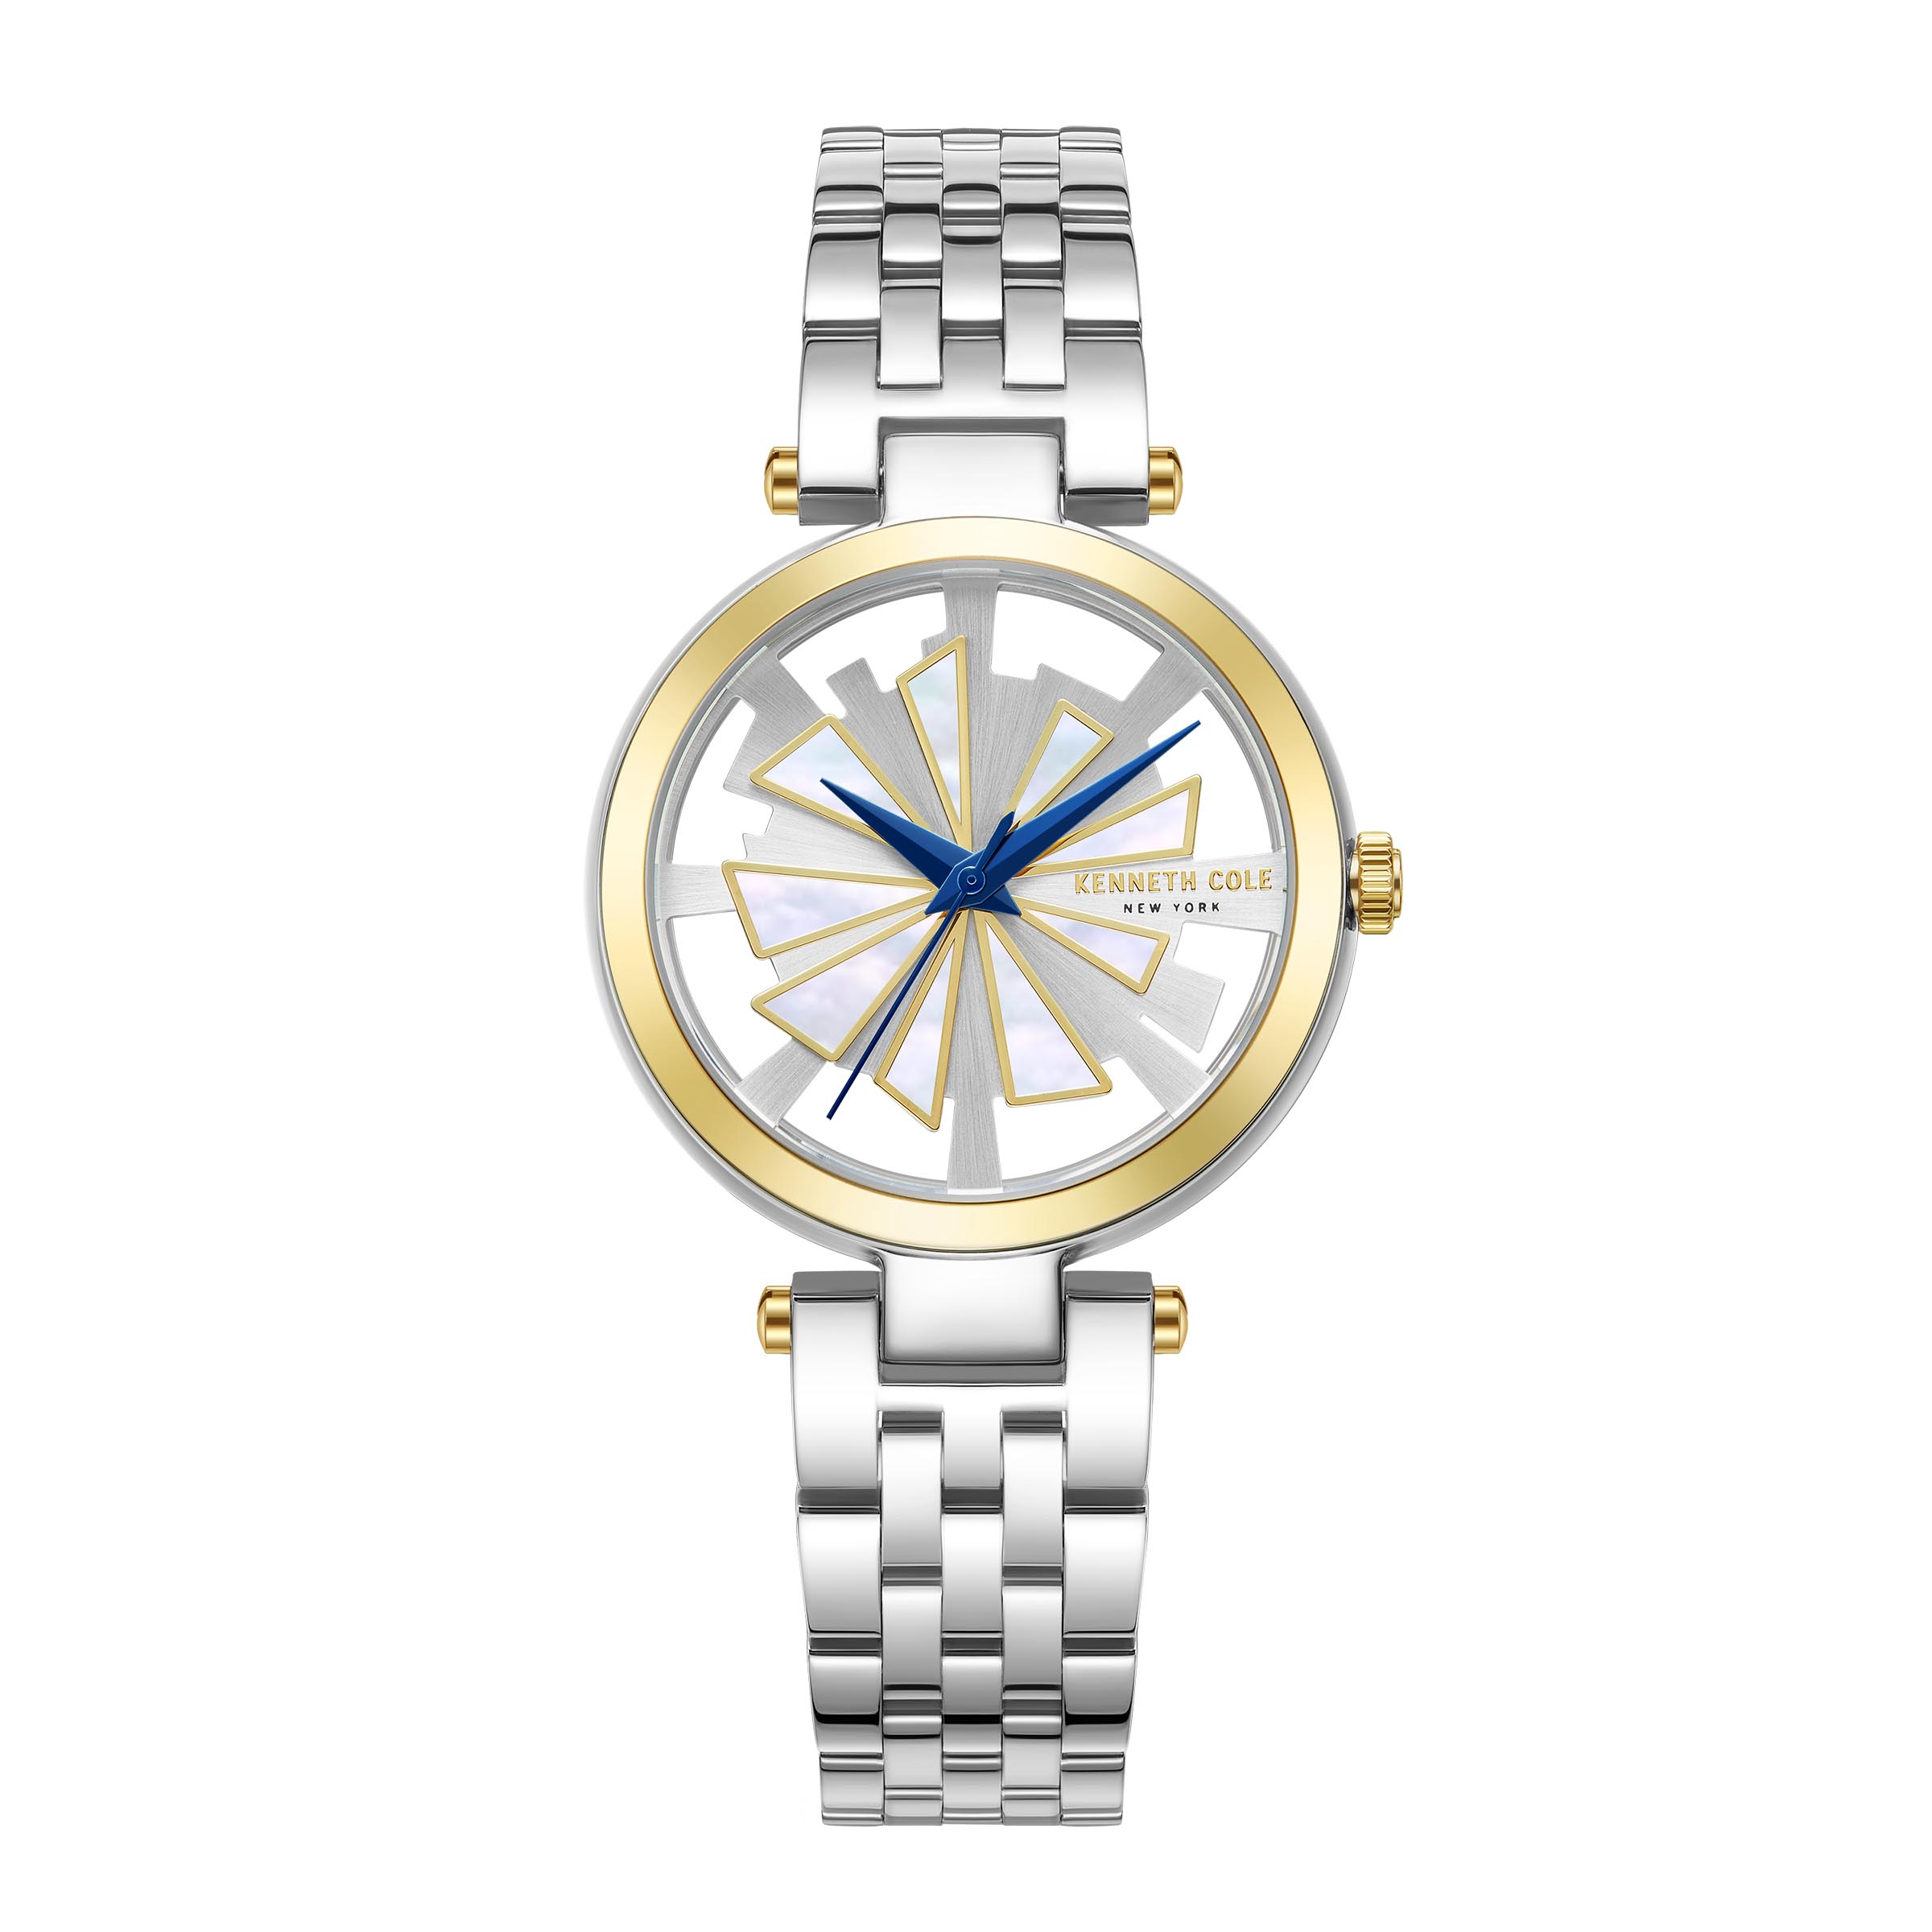 Kenneth Cole New York -KCWLG2222902- Stainless Steel Wrist Watch for Women - Silver & Gold